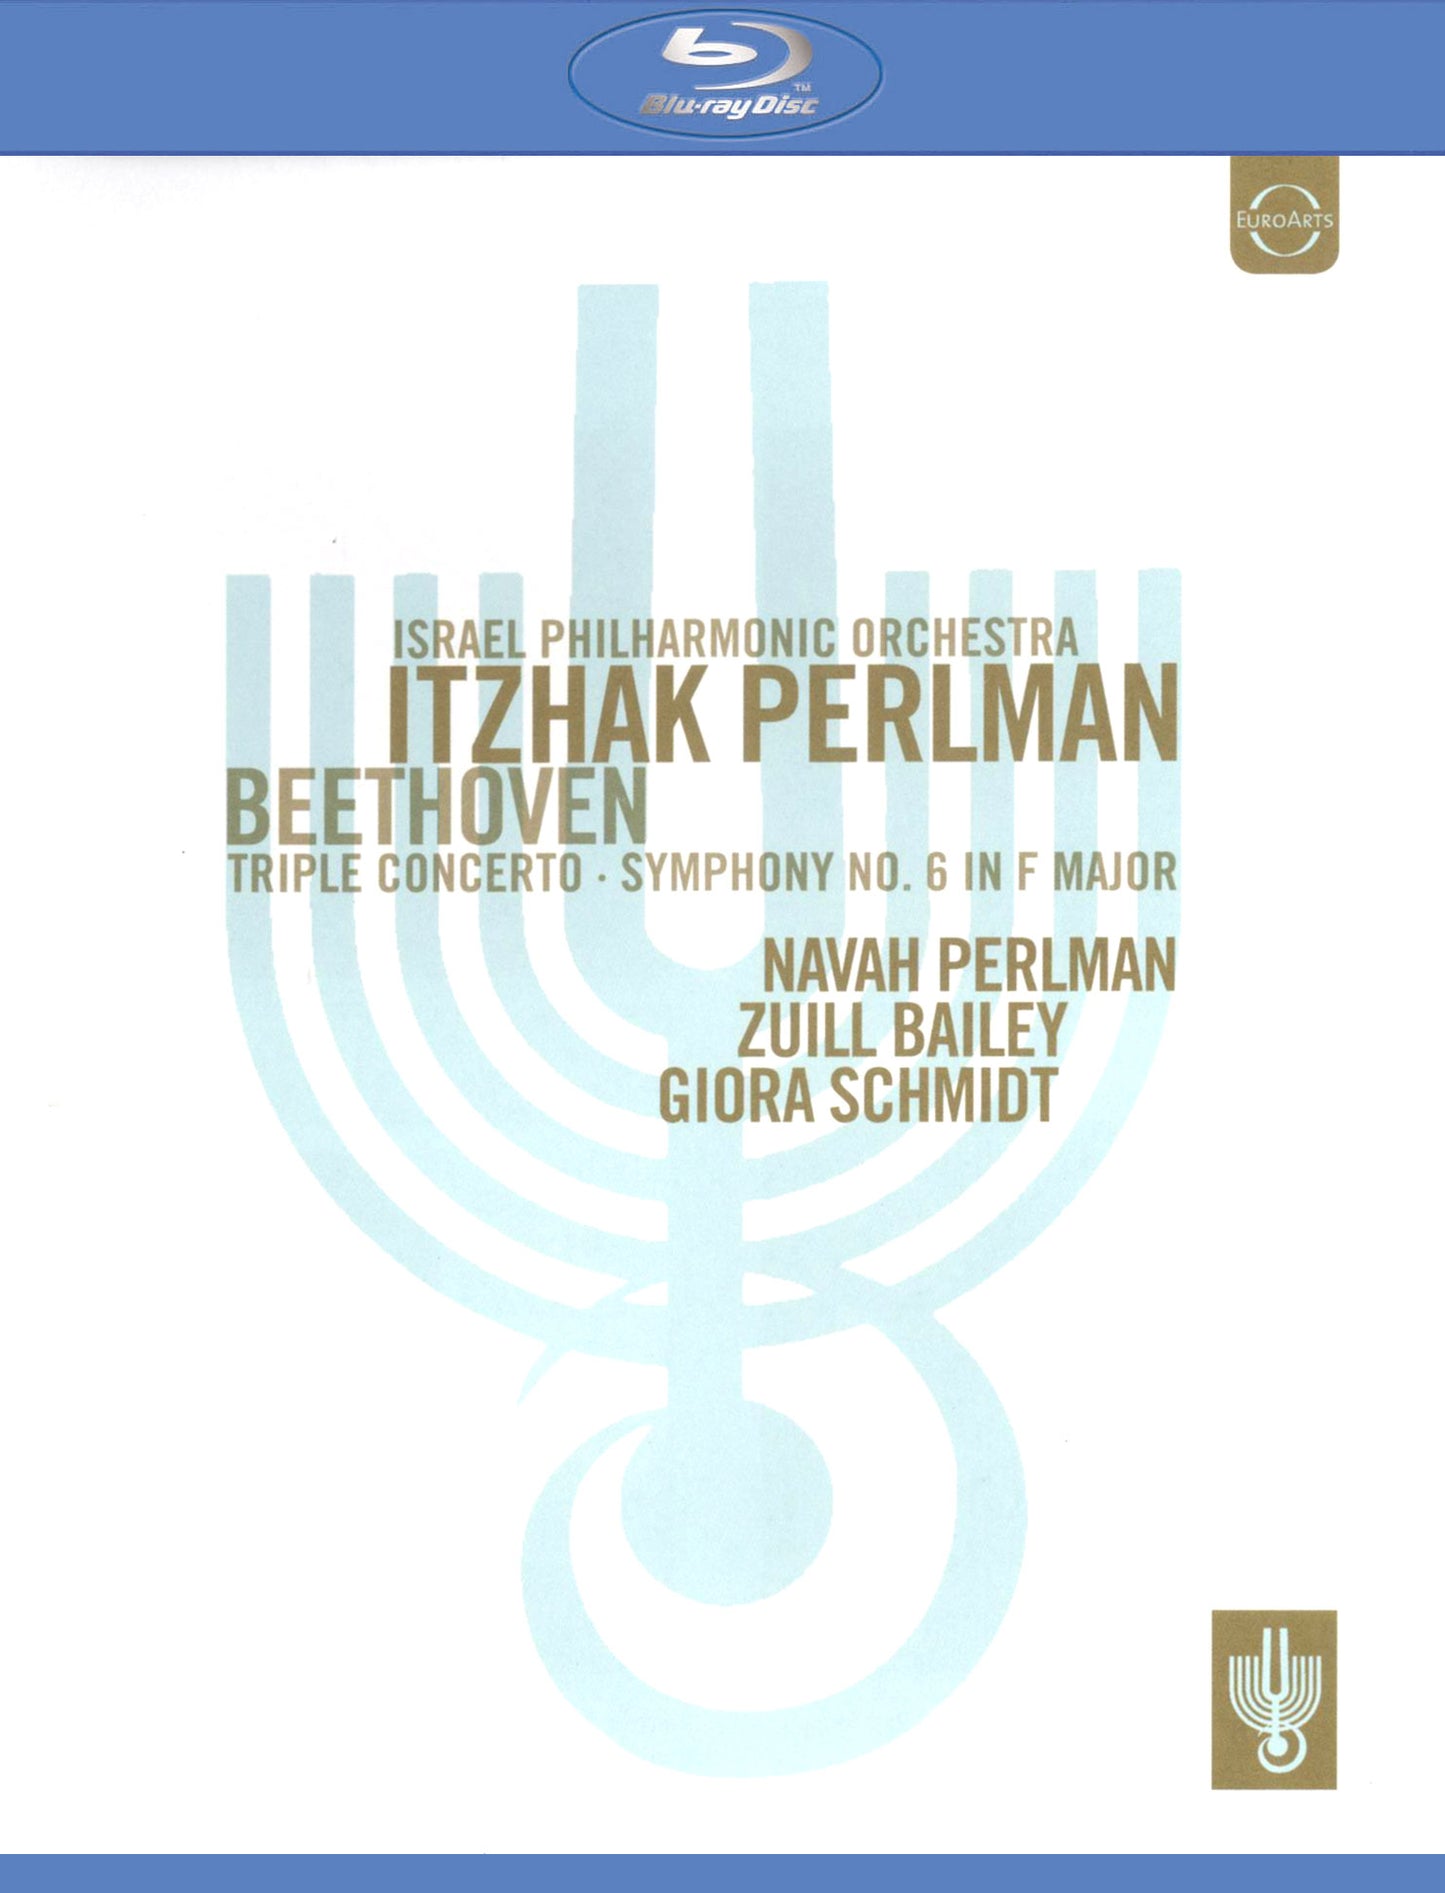 Perlman conducts the Israel Philharmonic Orchestra [Video] cover art